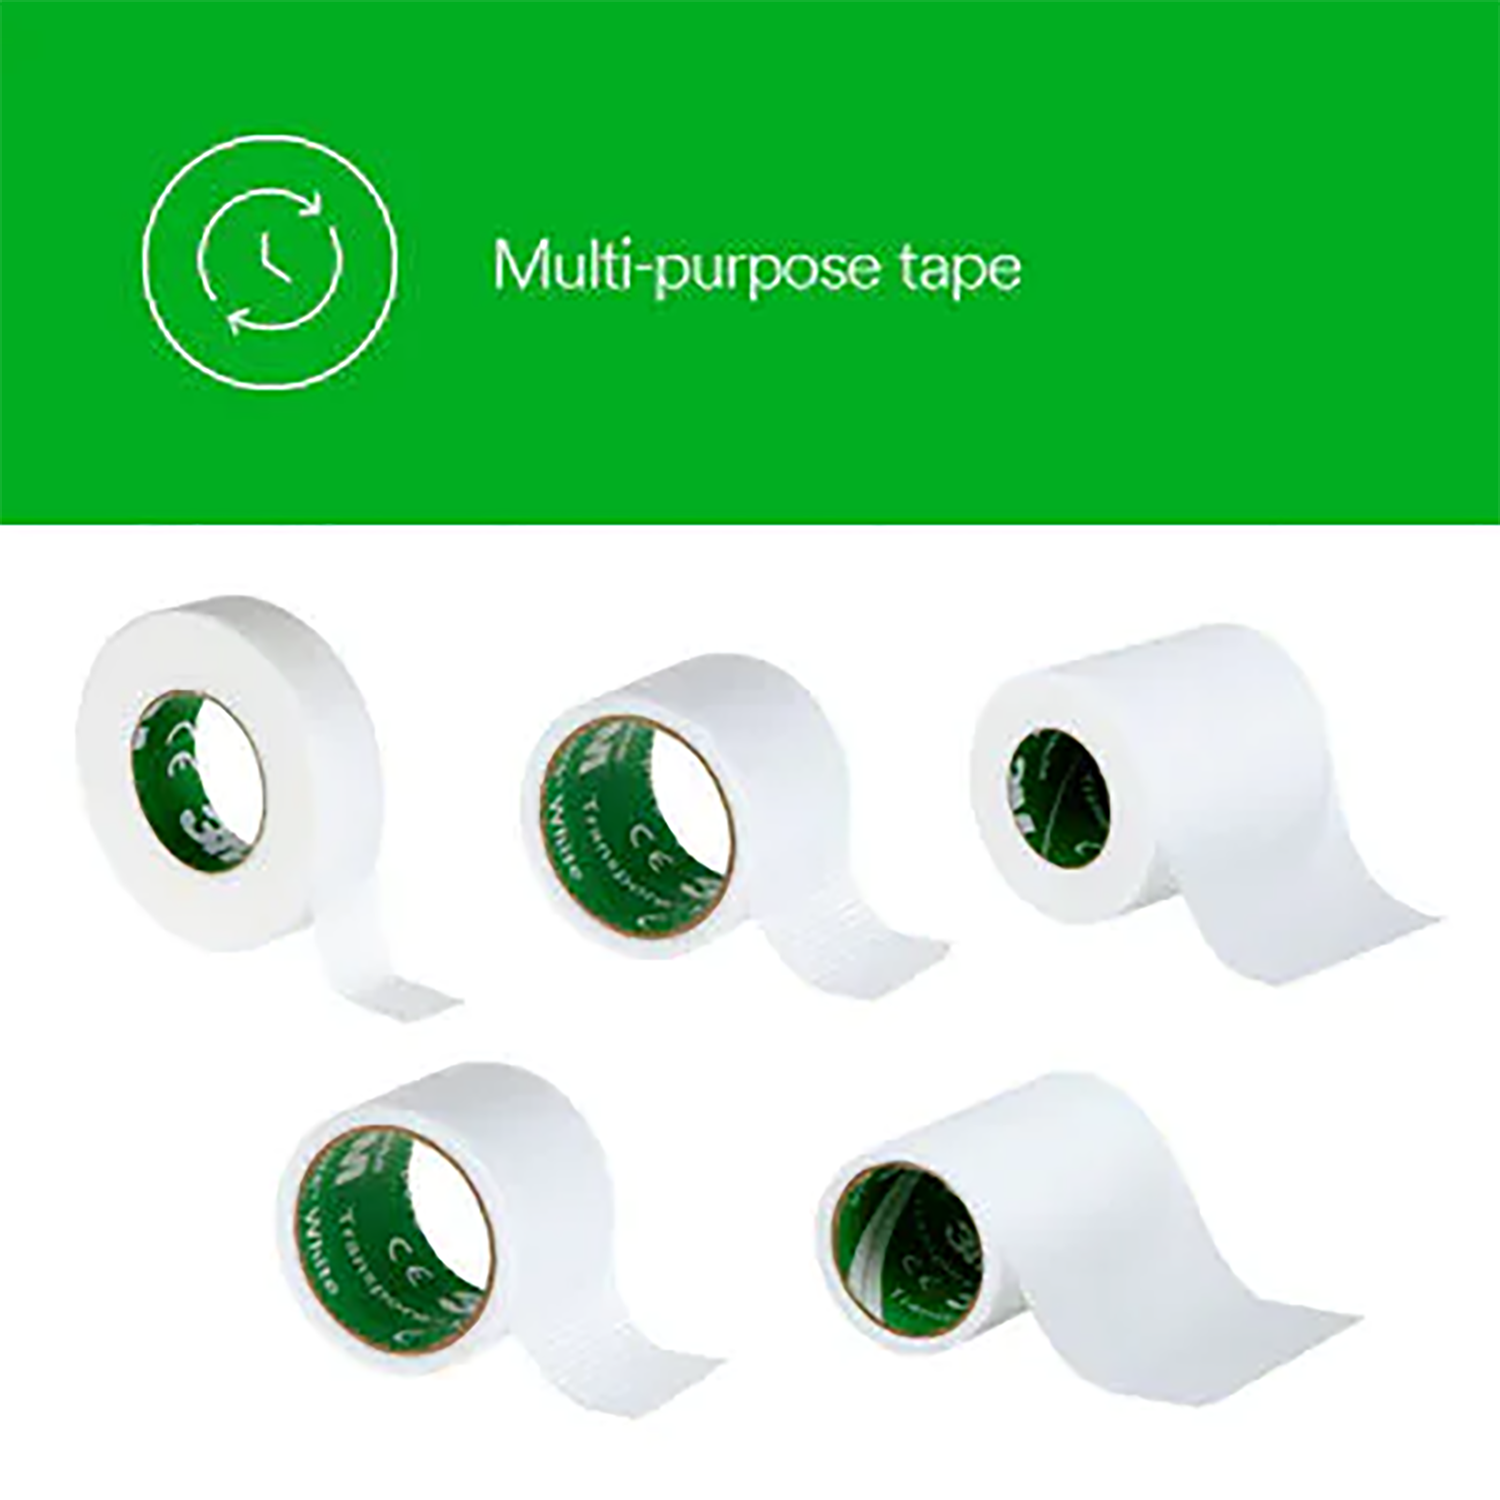 3M Transpore Surgical Tape (White) | 5cm x 9.1m | Pack of 6 Rolls (3)